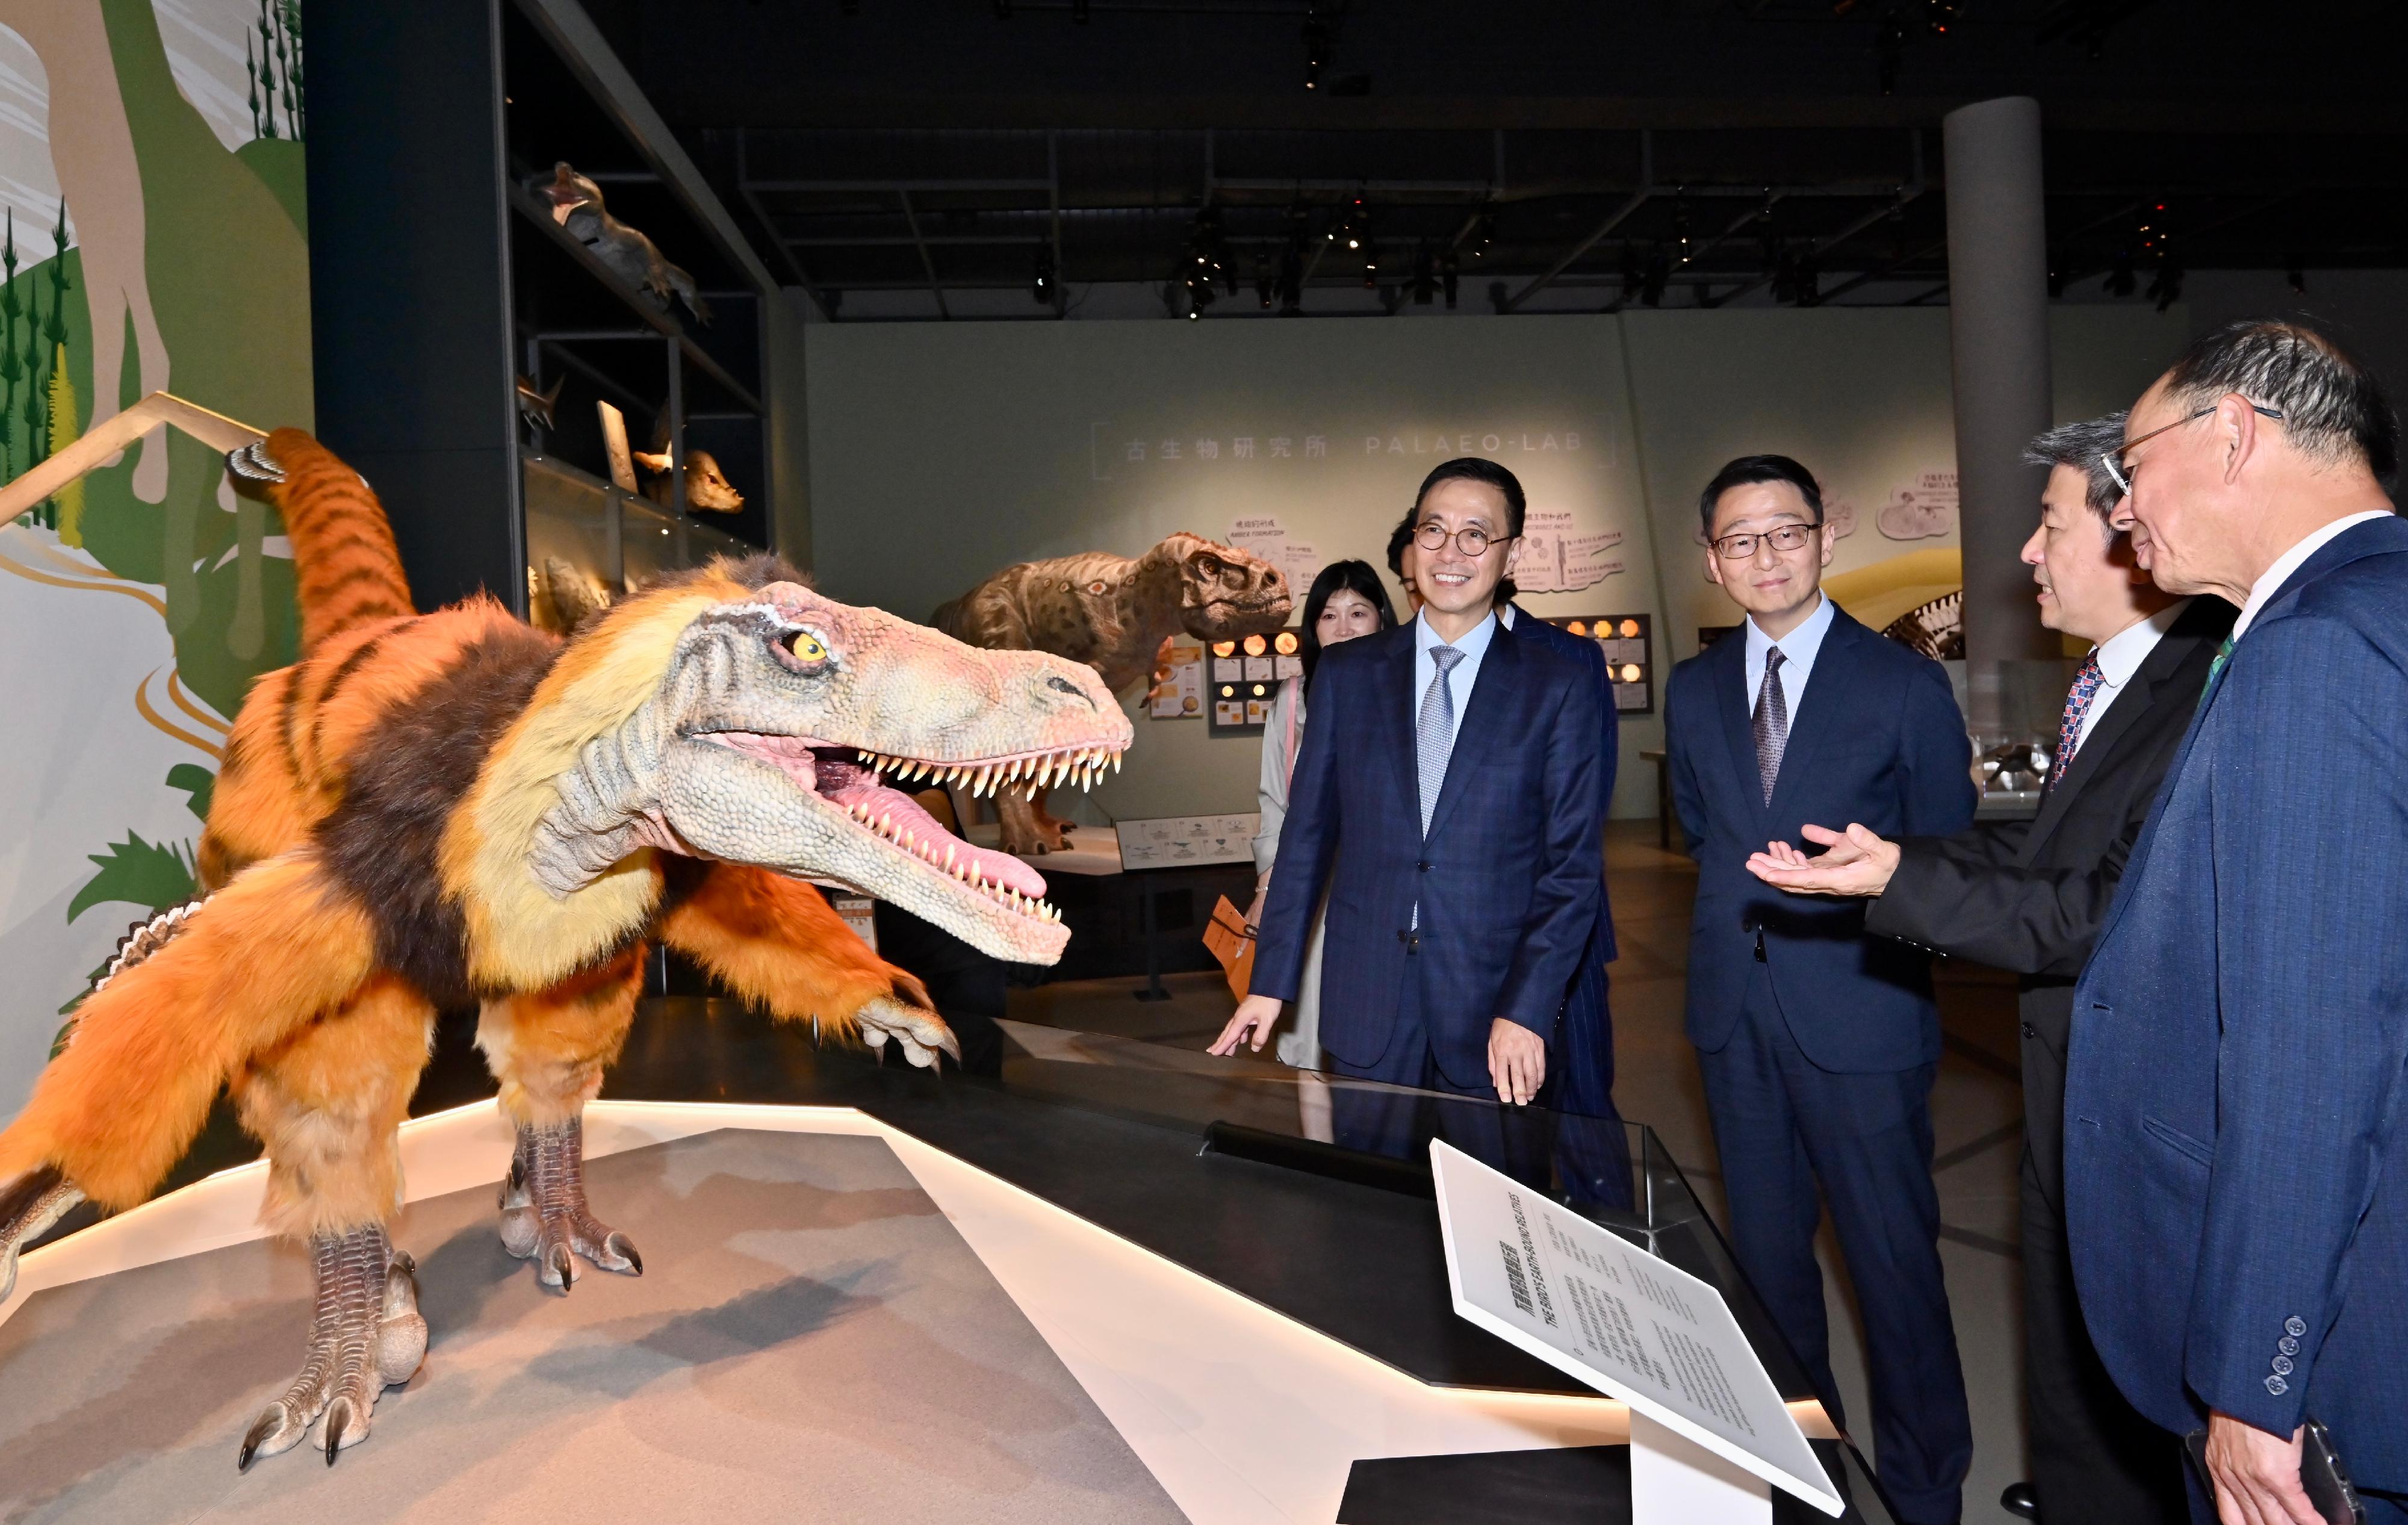 The opening ceremony for the "Extinction·Resilience" exhibition of the Palaeontology Gallery of the Hong Kong Science Museum was held today (September 14) at the museum. Photo shows (from left) the Secretary for Culture, Sports and Tourism, Mr Kevin Yeung; the Director of Leisure and Cultural Services, Mr Vincent Liu; the Museum Director of the Hong Kong Science Museum, Mr Lawrence Lee; and Museum Expert Adviser of the Hong Kong Science Museum Professor Chan Lung-sang, touring the exhibition gallery as officiating guests.